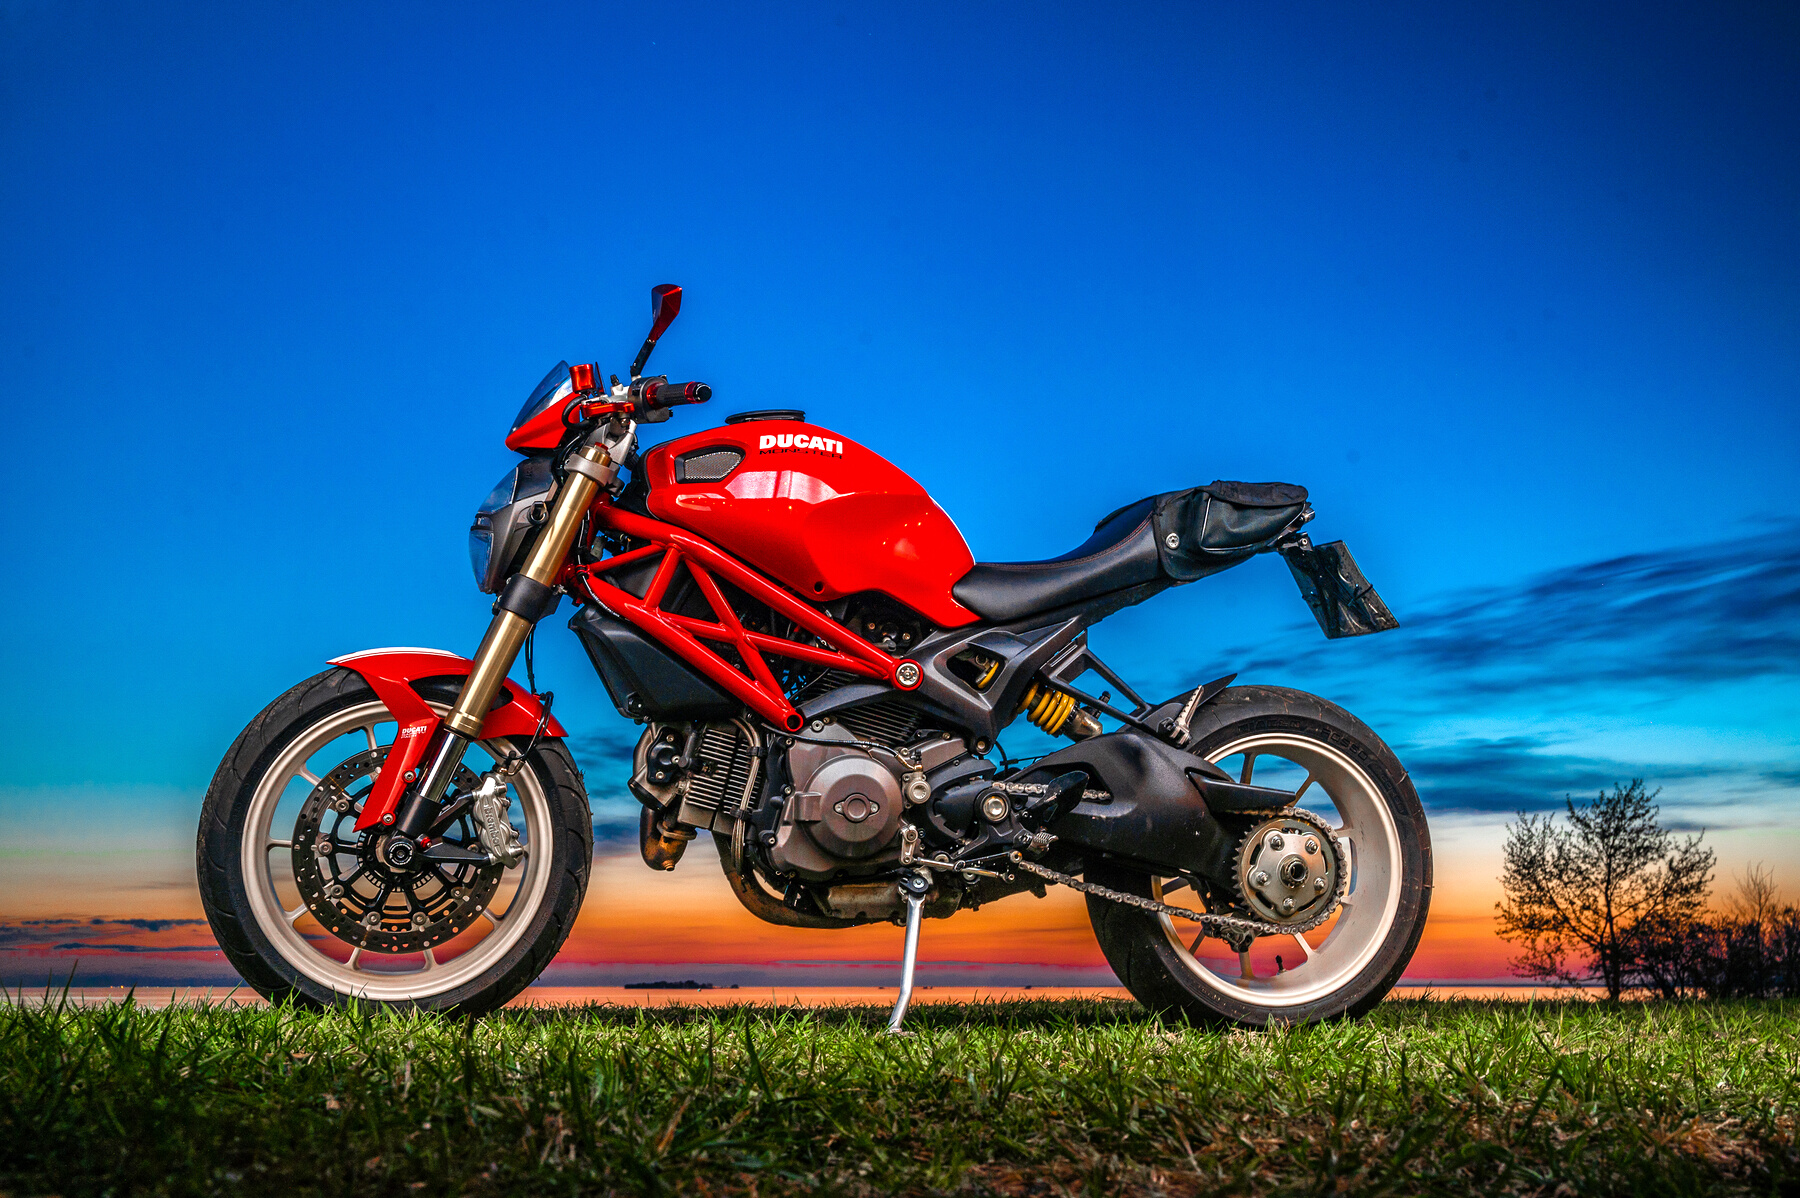 Red and Black Ducati Monster 796 on Green Grass 